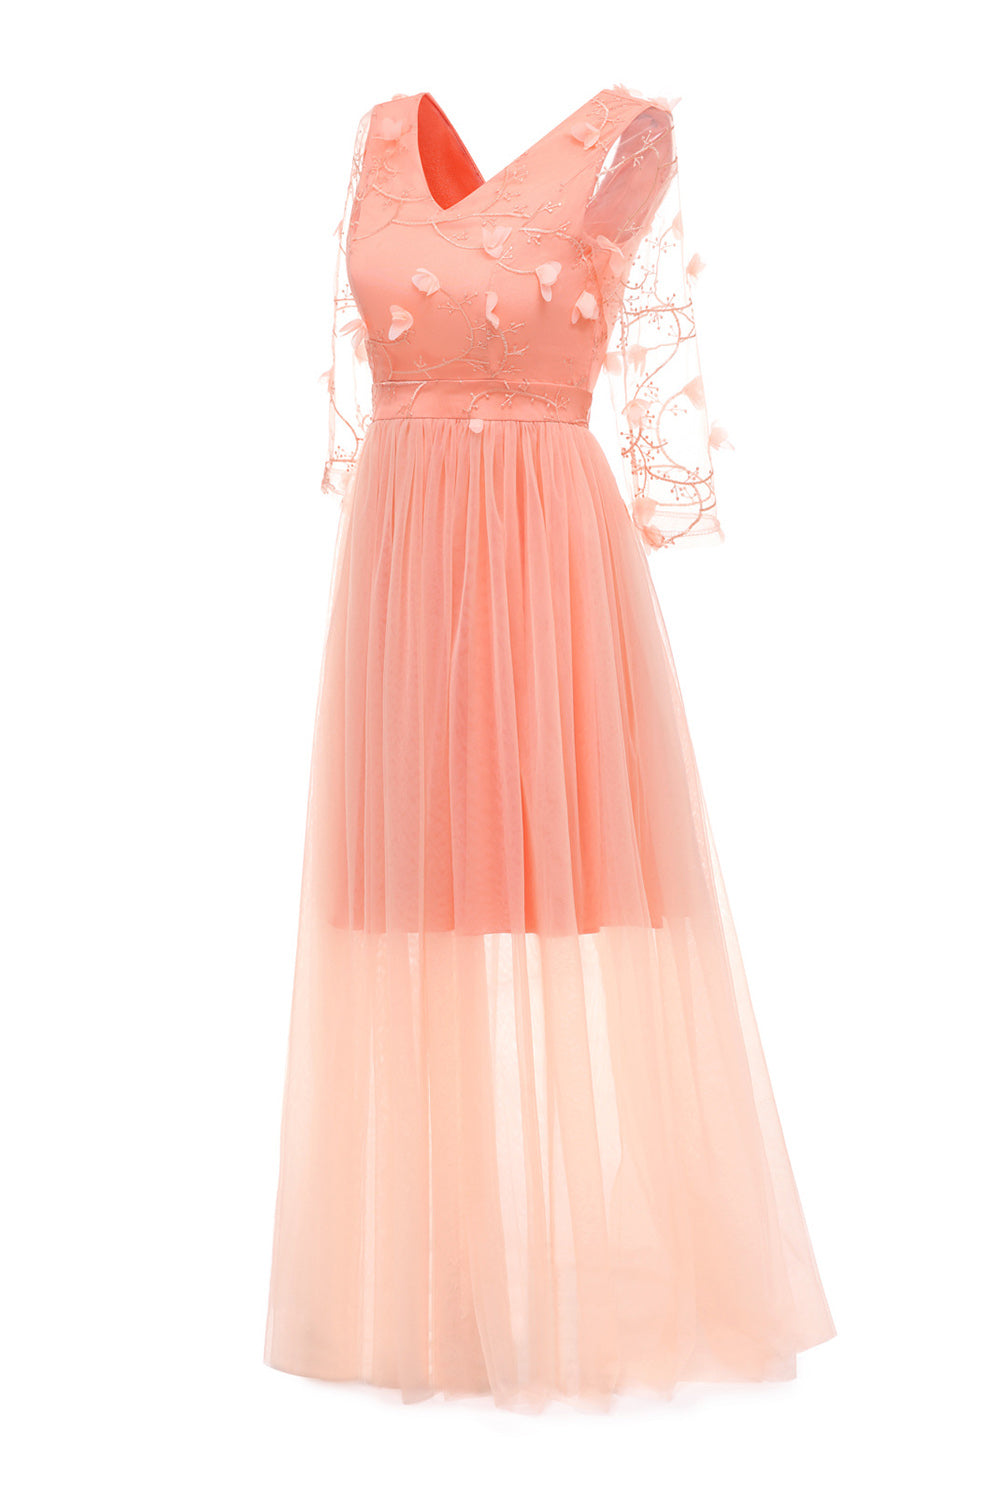 Apricot Tulle Long Sleeve Vintage Dress With Appliques